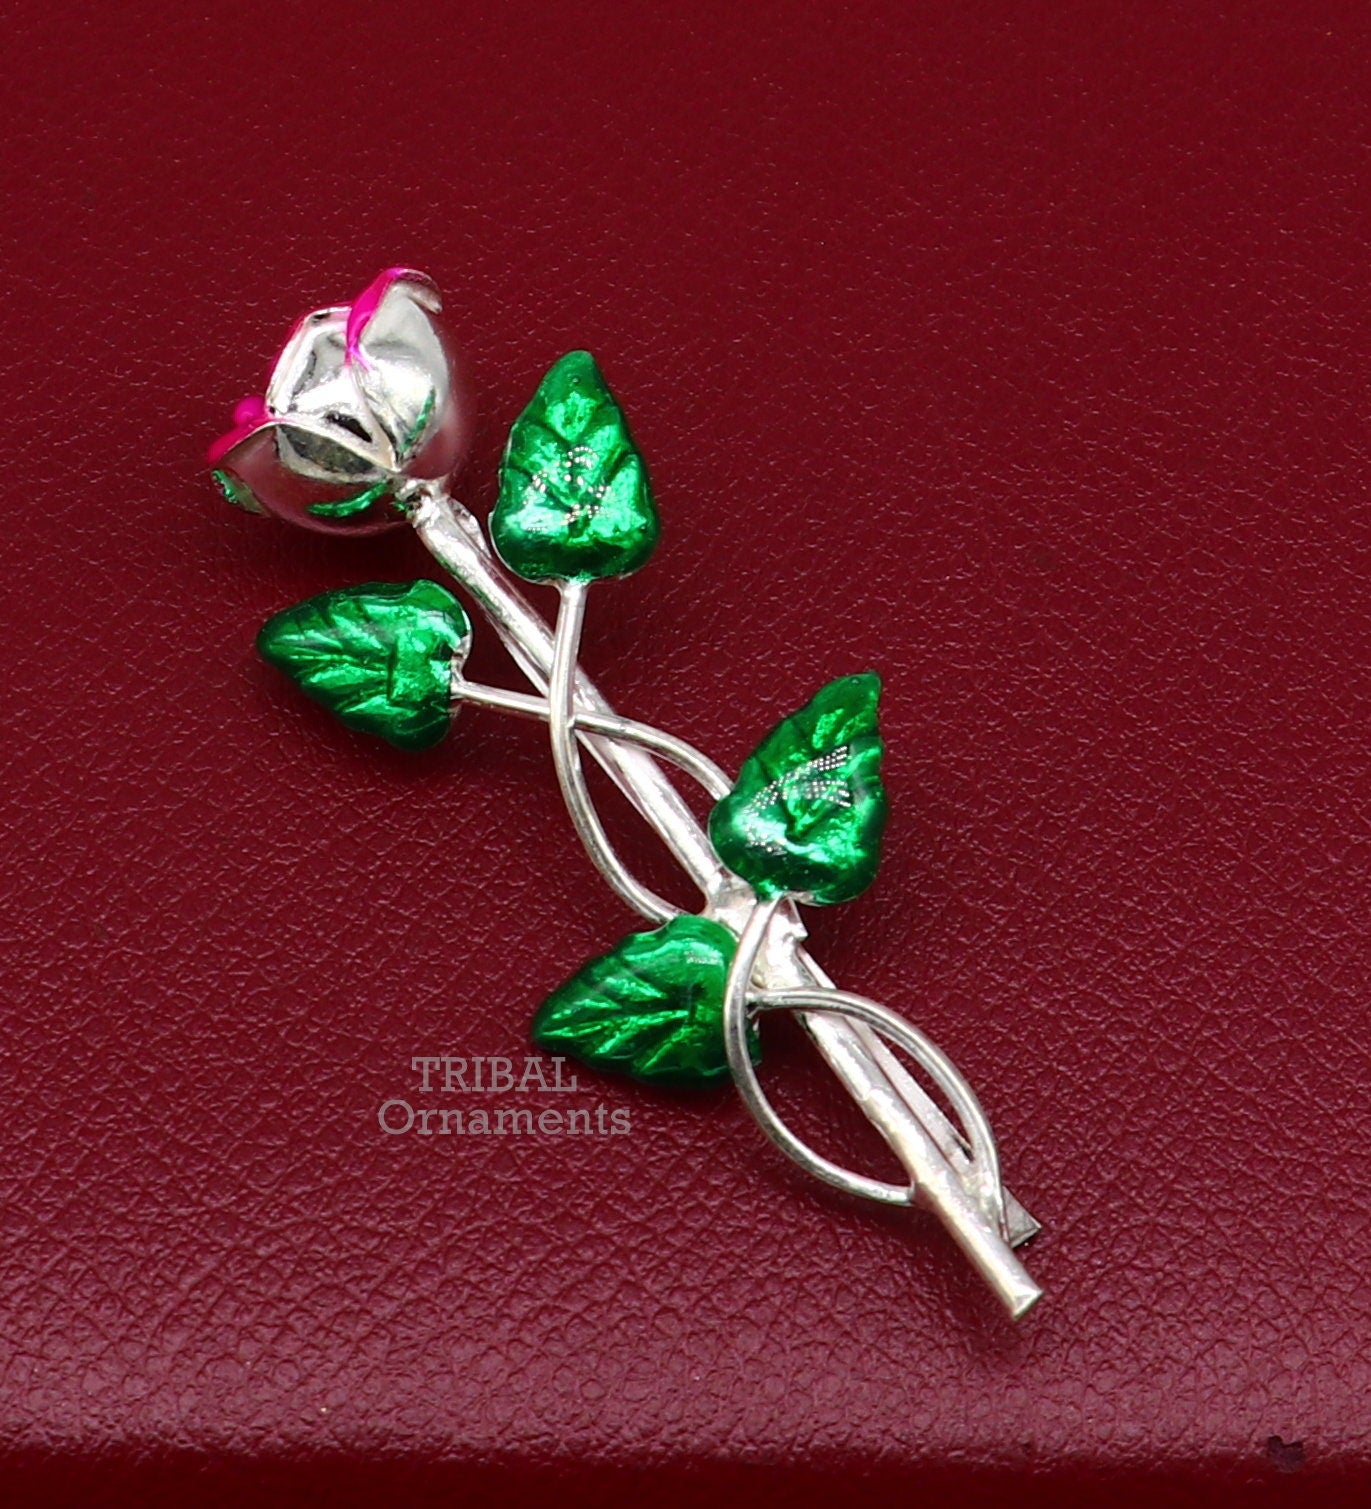 925 sterling silver handmade rose flower design men's brooch for shirt or suit blazer suit amazing wedding party jewelry for men's su746 - TRIBAL ORNAMENTS